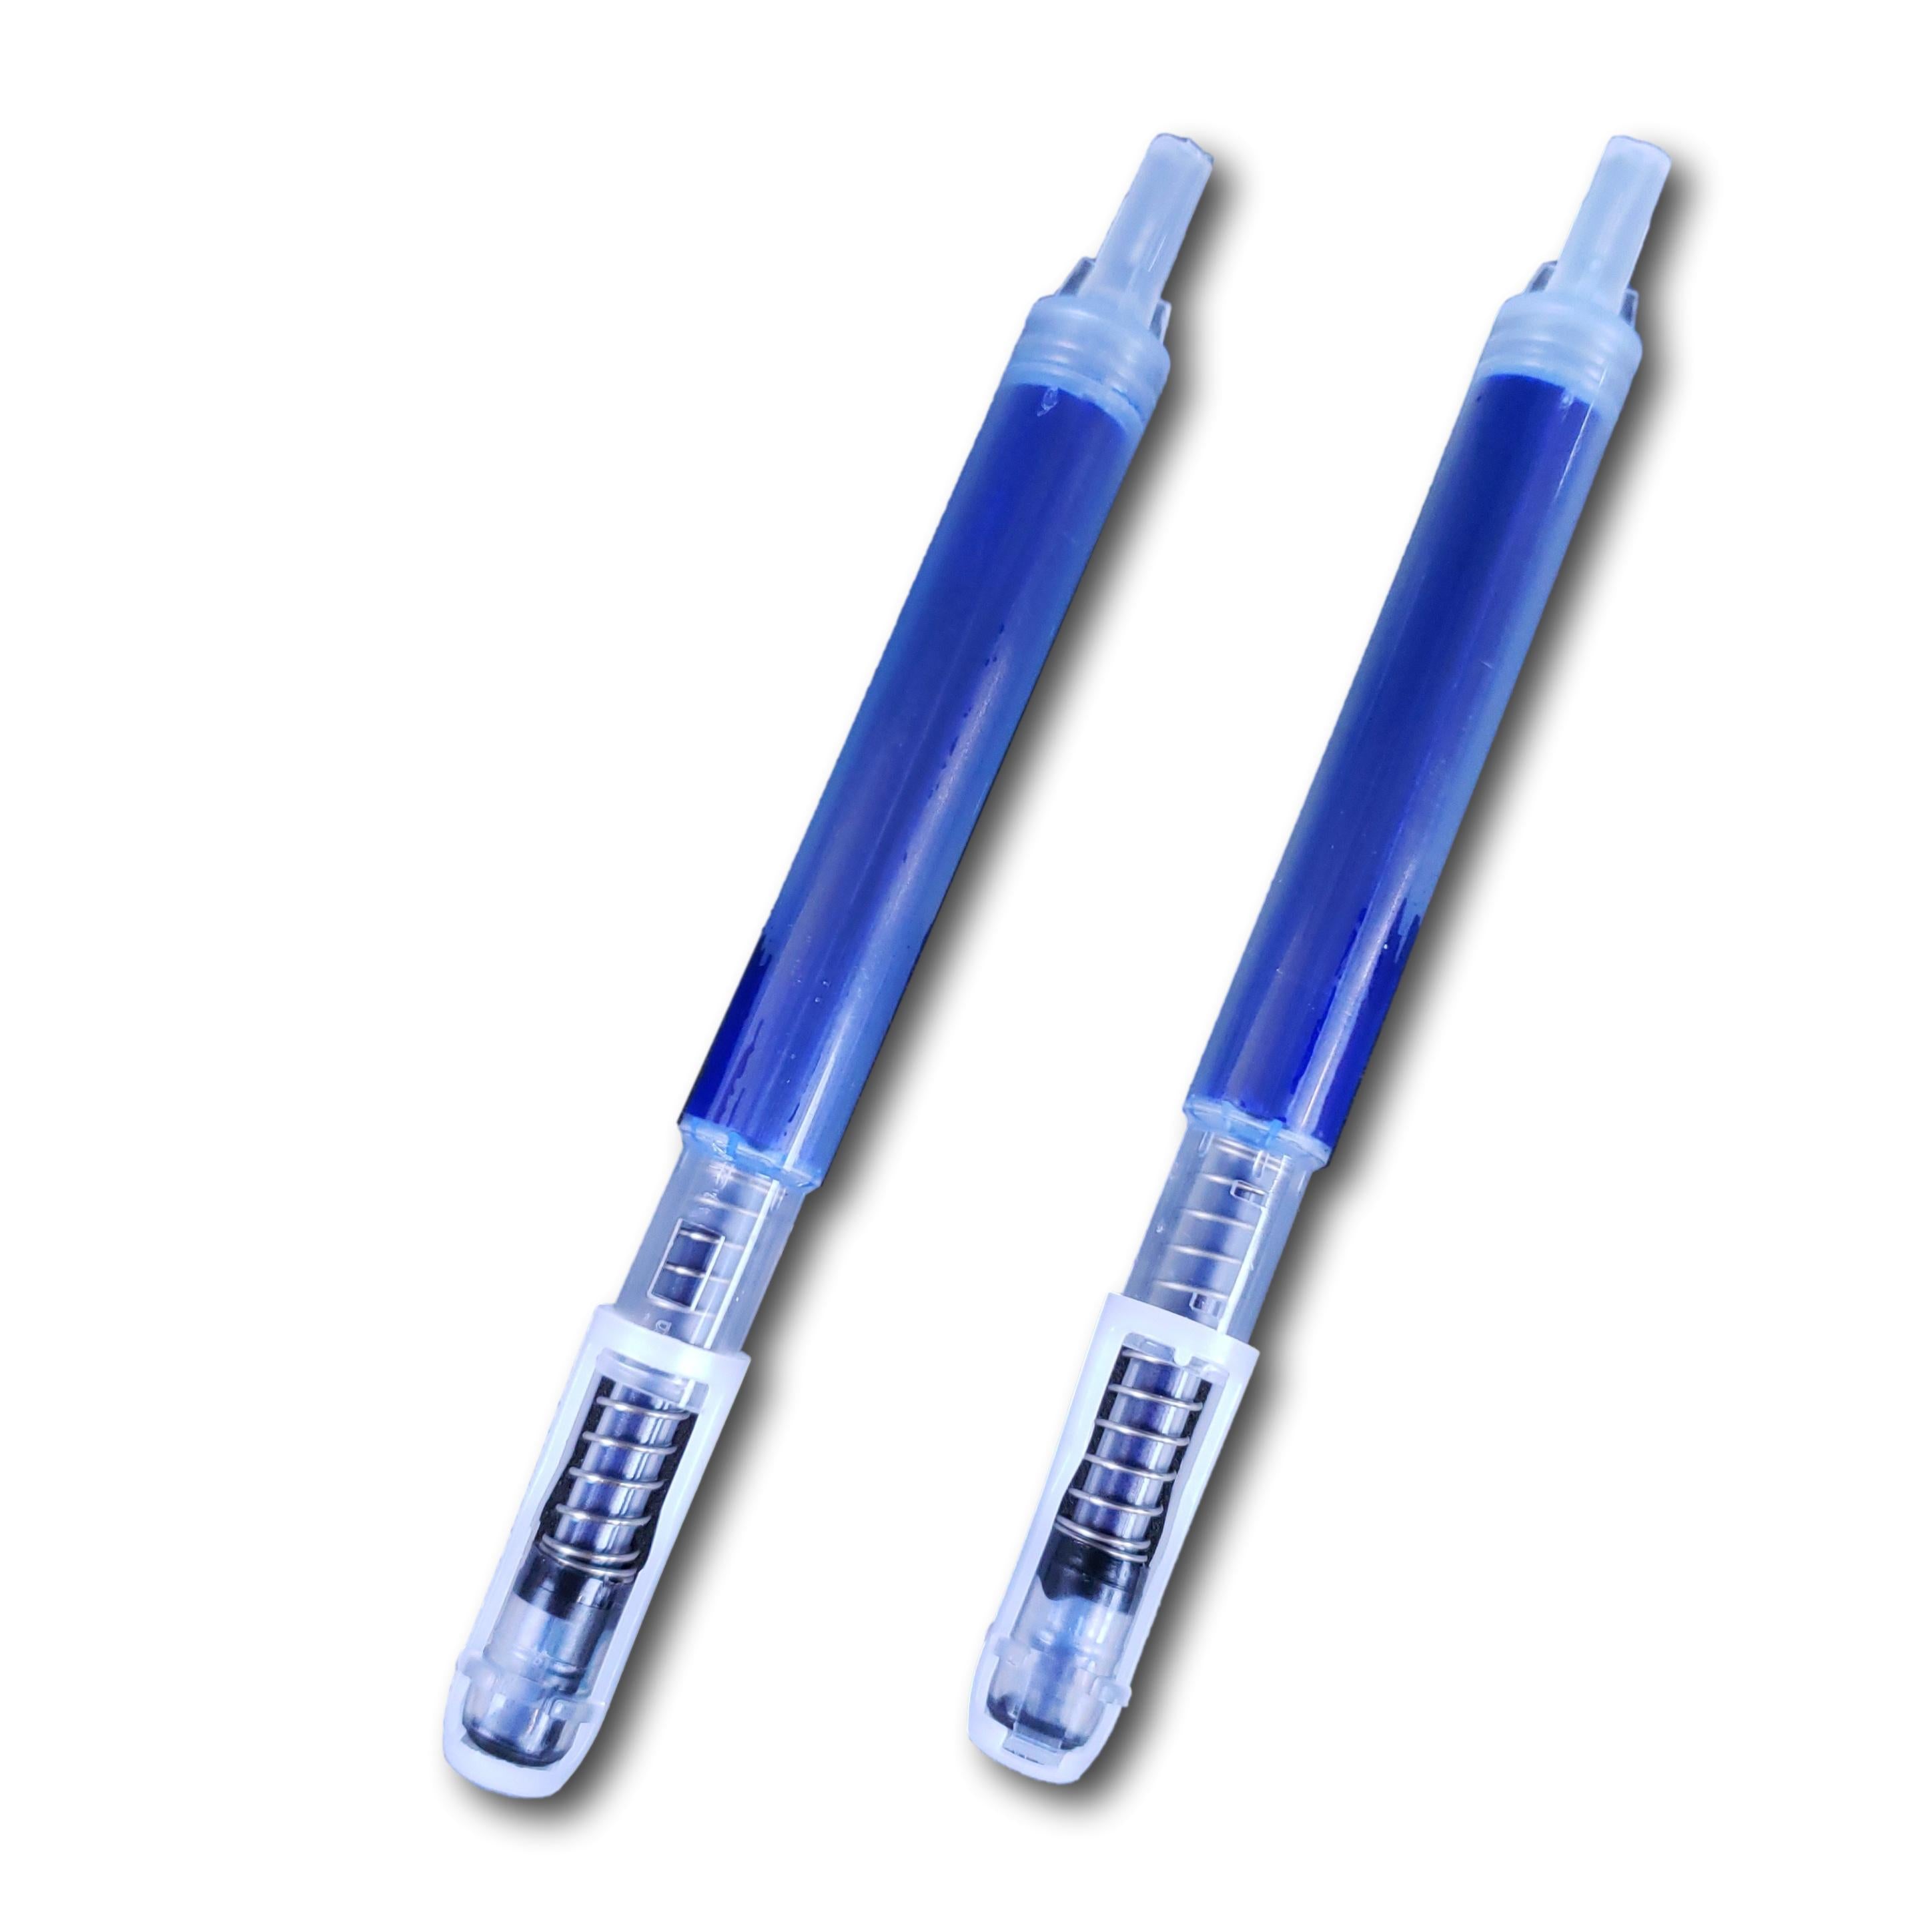 MARKSMITH® Fine Permanent Cartridge Refill 2 Pack - BLUE -